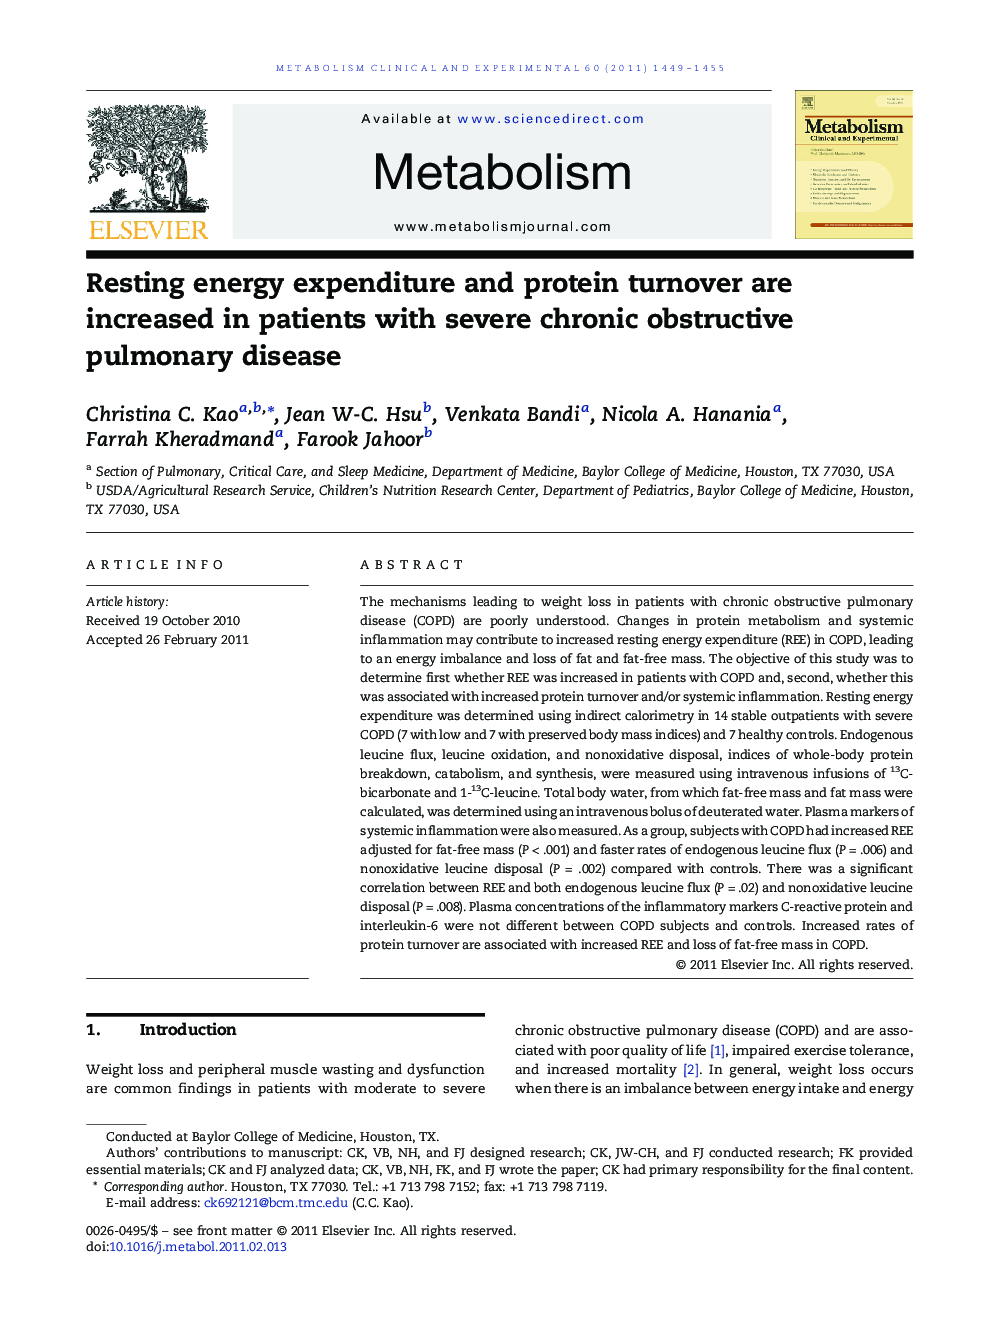 Resting energy expenditure and protein turnover are increased in patients with severe chronic obstructive pulmonary disease